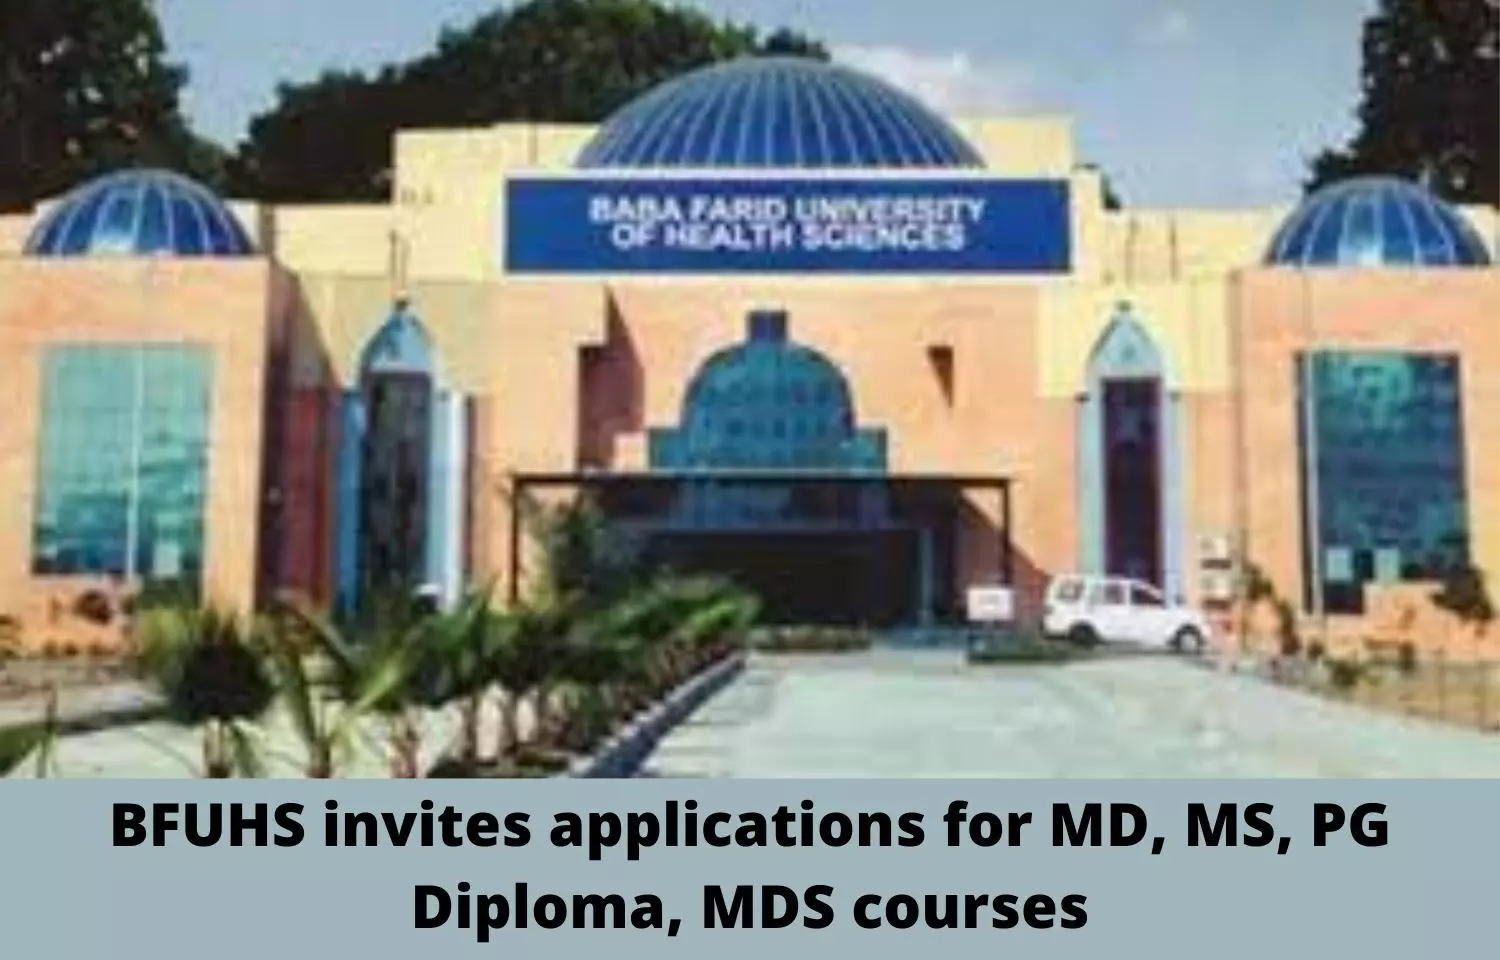 BFUHS invites applications for MD, MS, PG Diploma, MDS courses